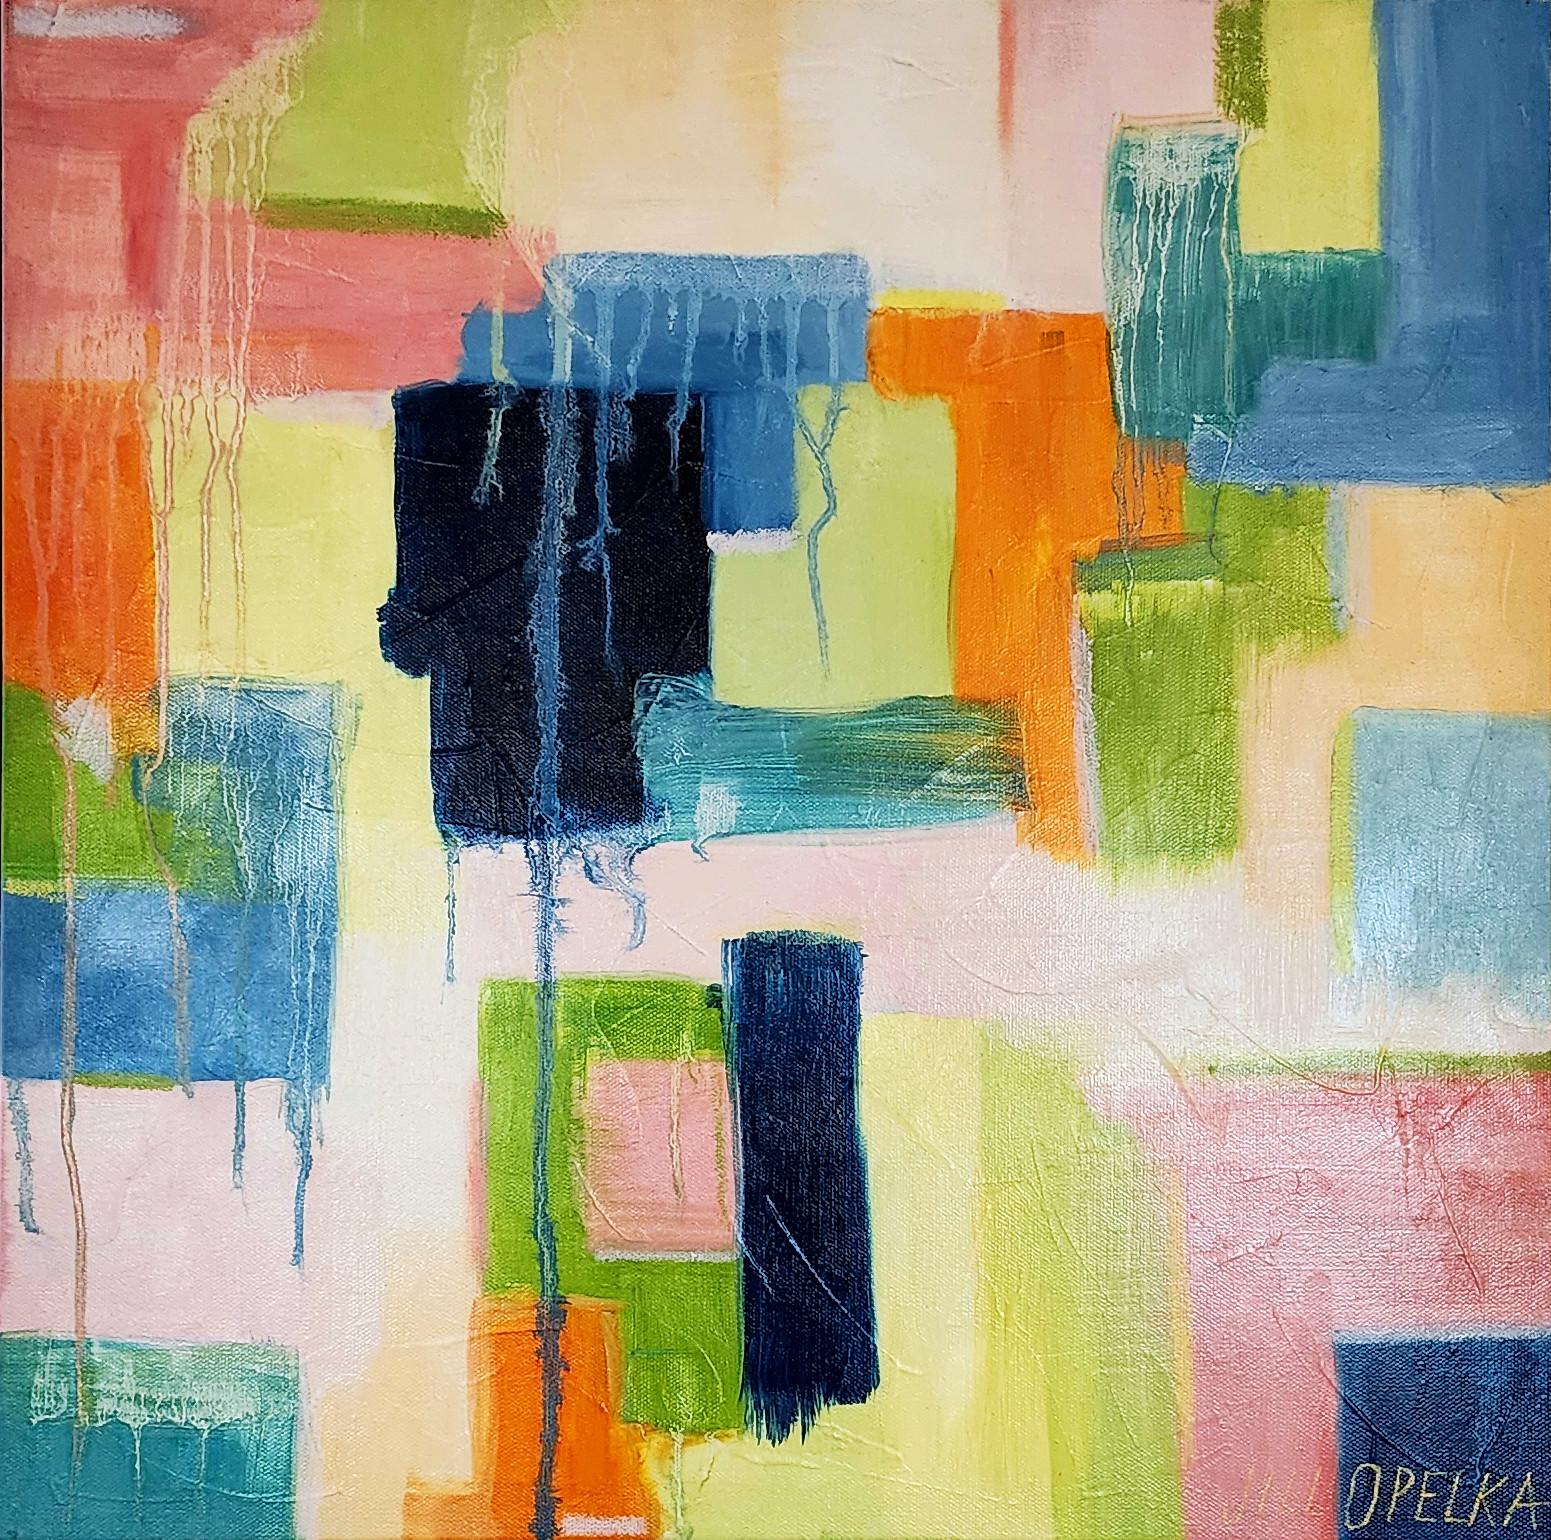 Abstract IV (Abstract, Vibrant, Deep, Blue, Navy, Green, Orange, Pink, 30% OFF)